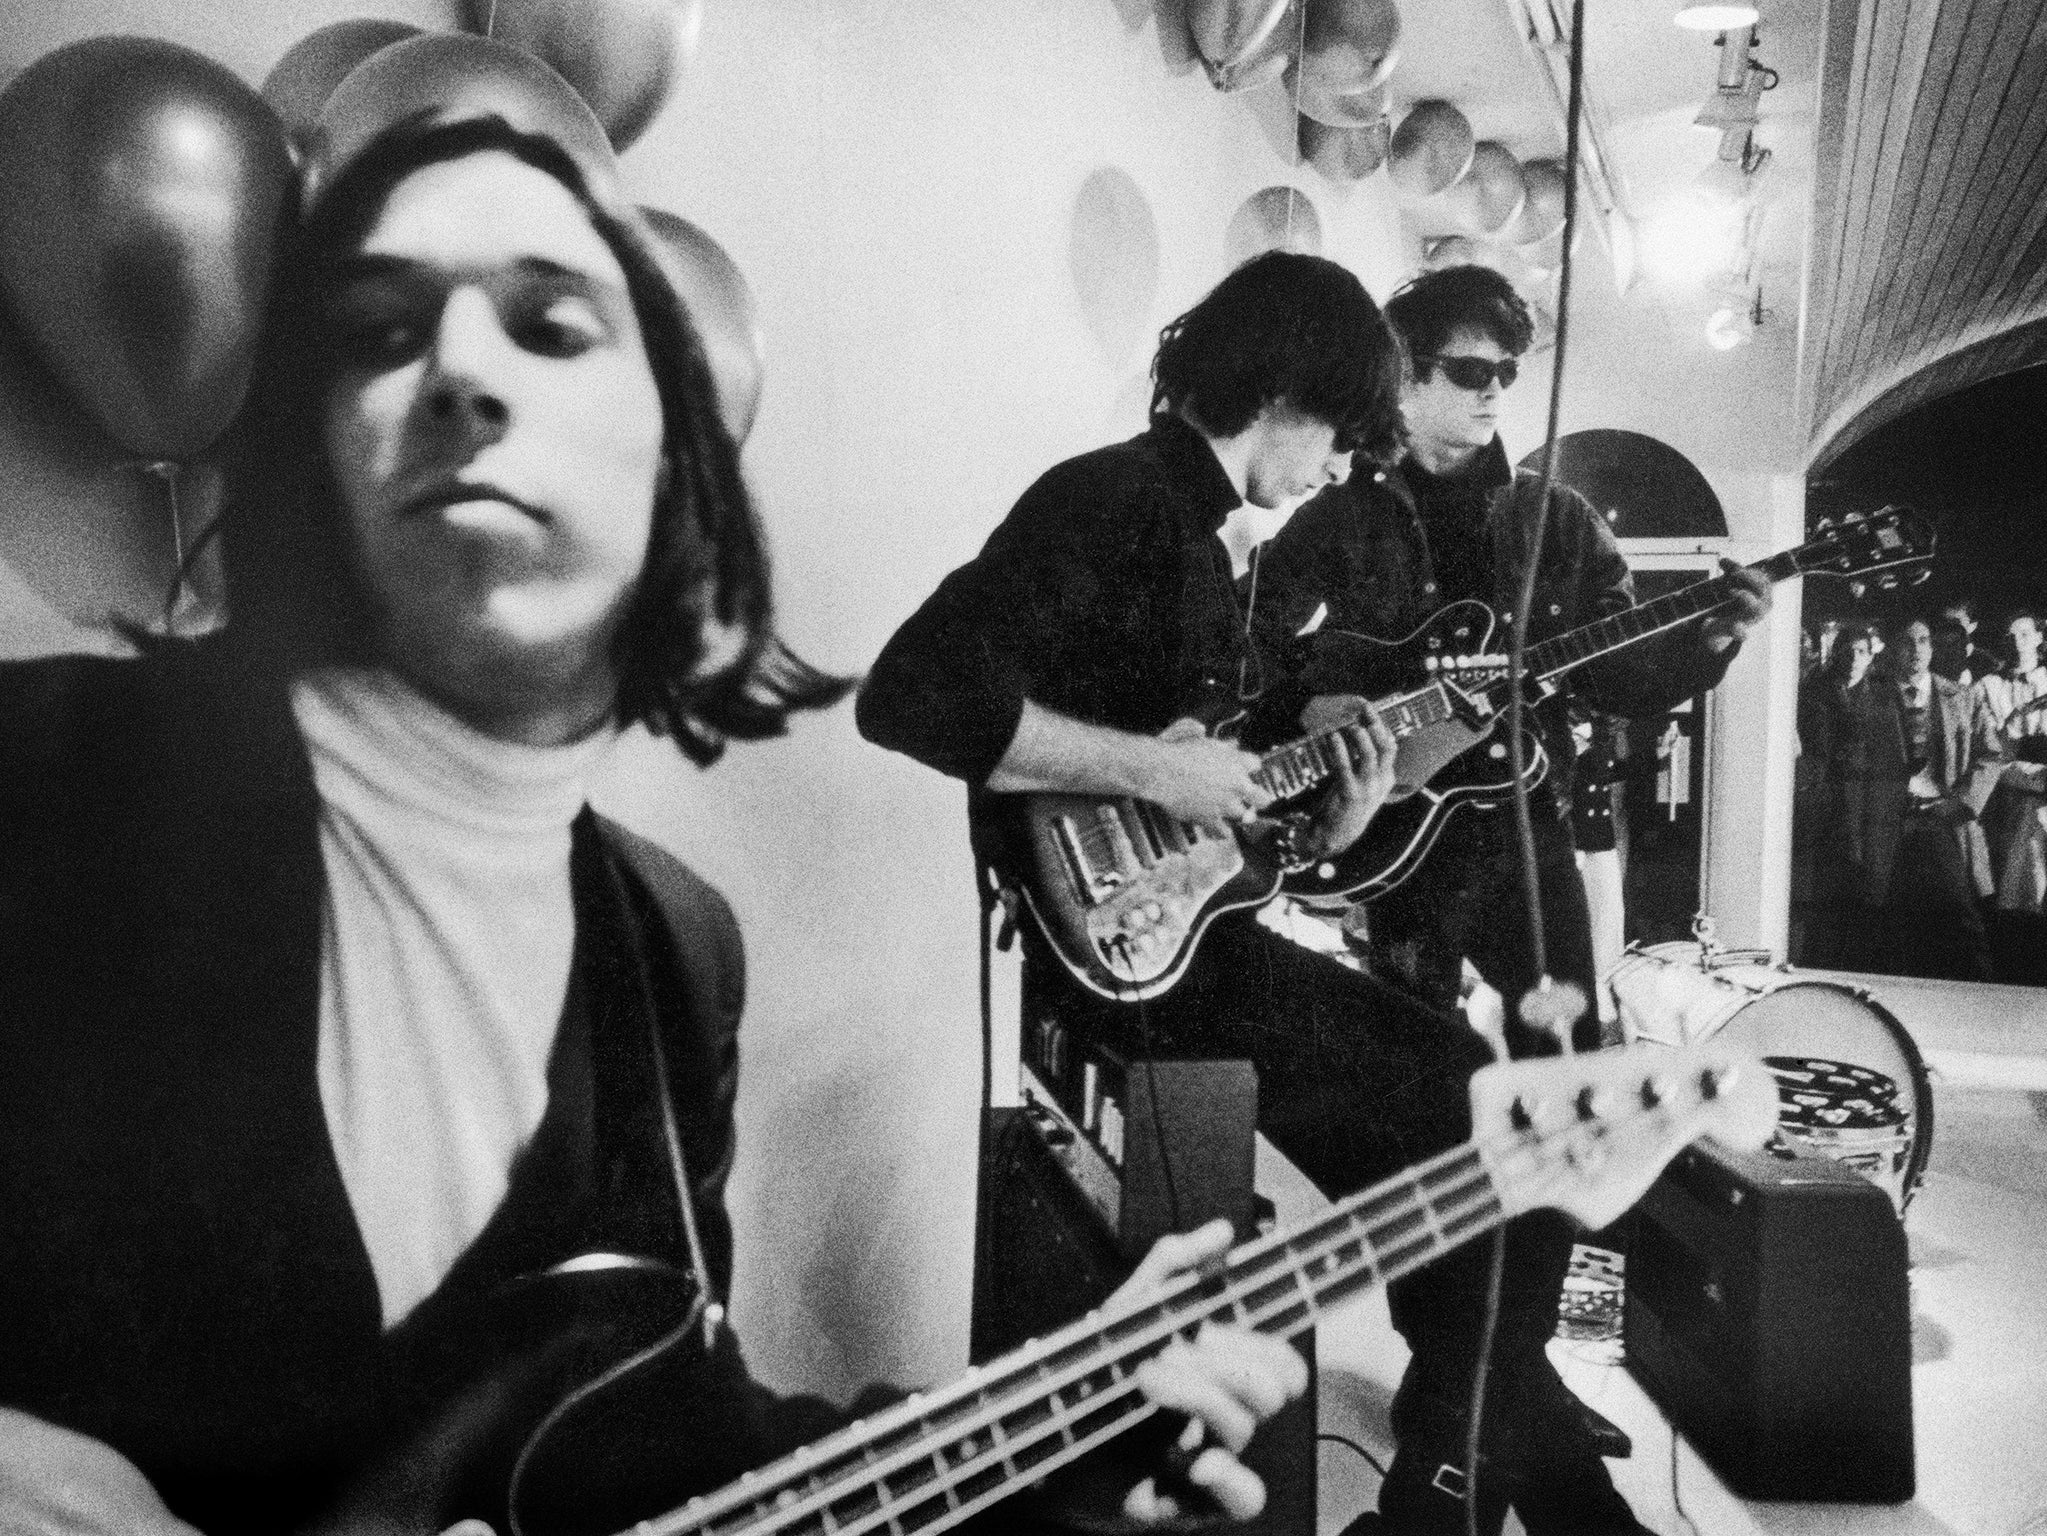 John Cale, Sterling Morrison and Lou Reed in archival photography from ‘The Velvet Underground’